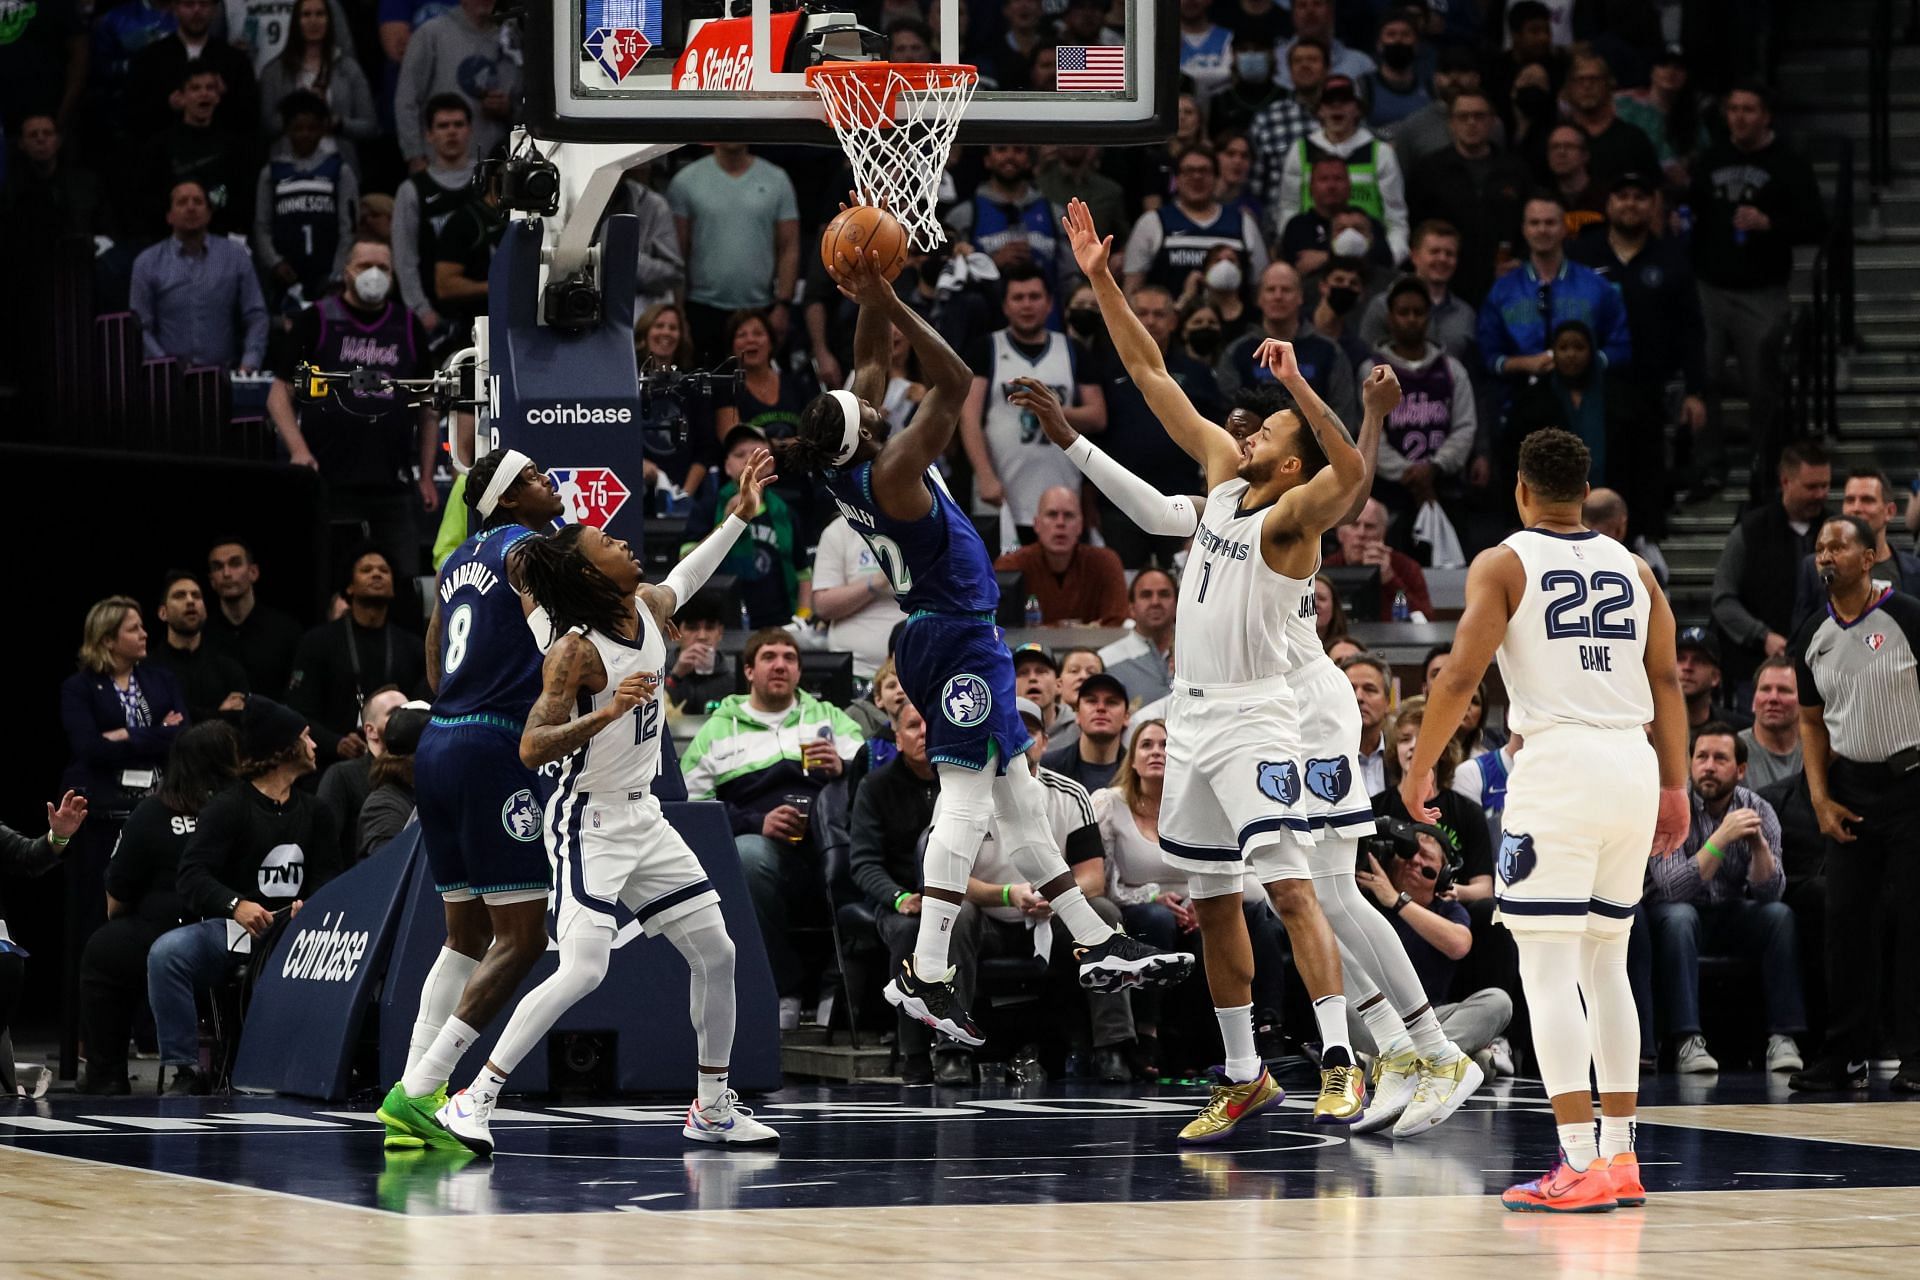 The Minnesota Timberwolves are looking to leave Minneapolis with a huge 3-1 lead against the Memphis Grizzlies on Saturday.